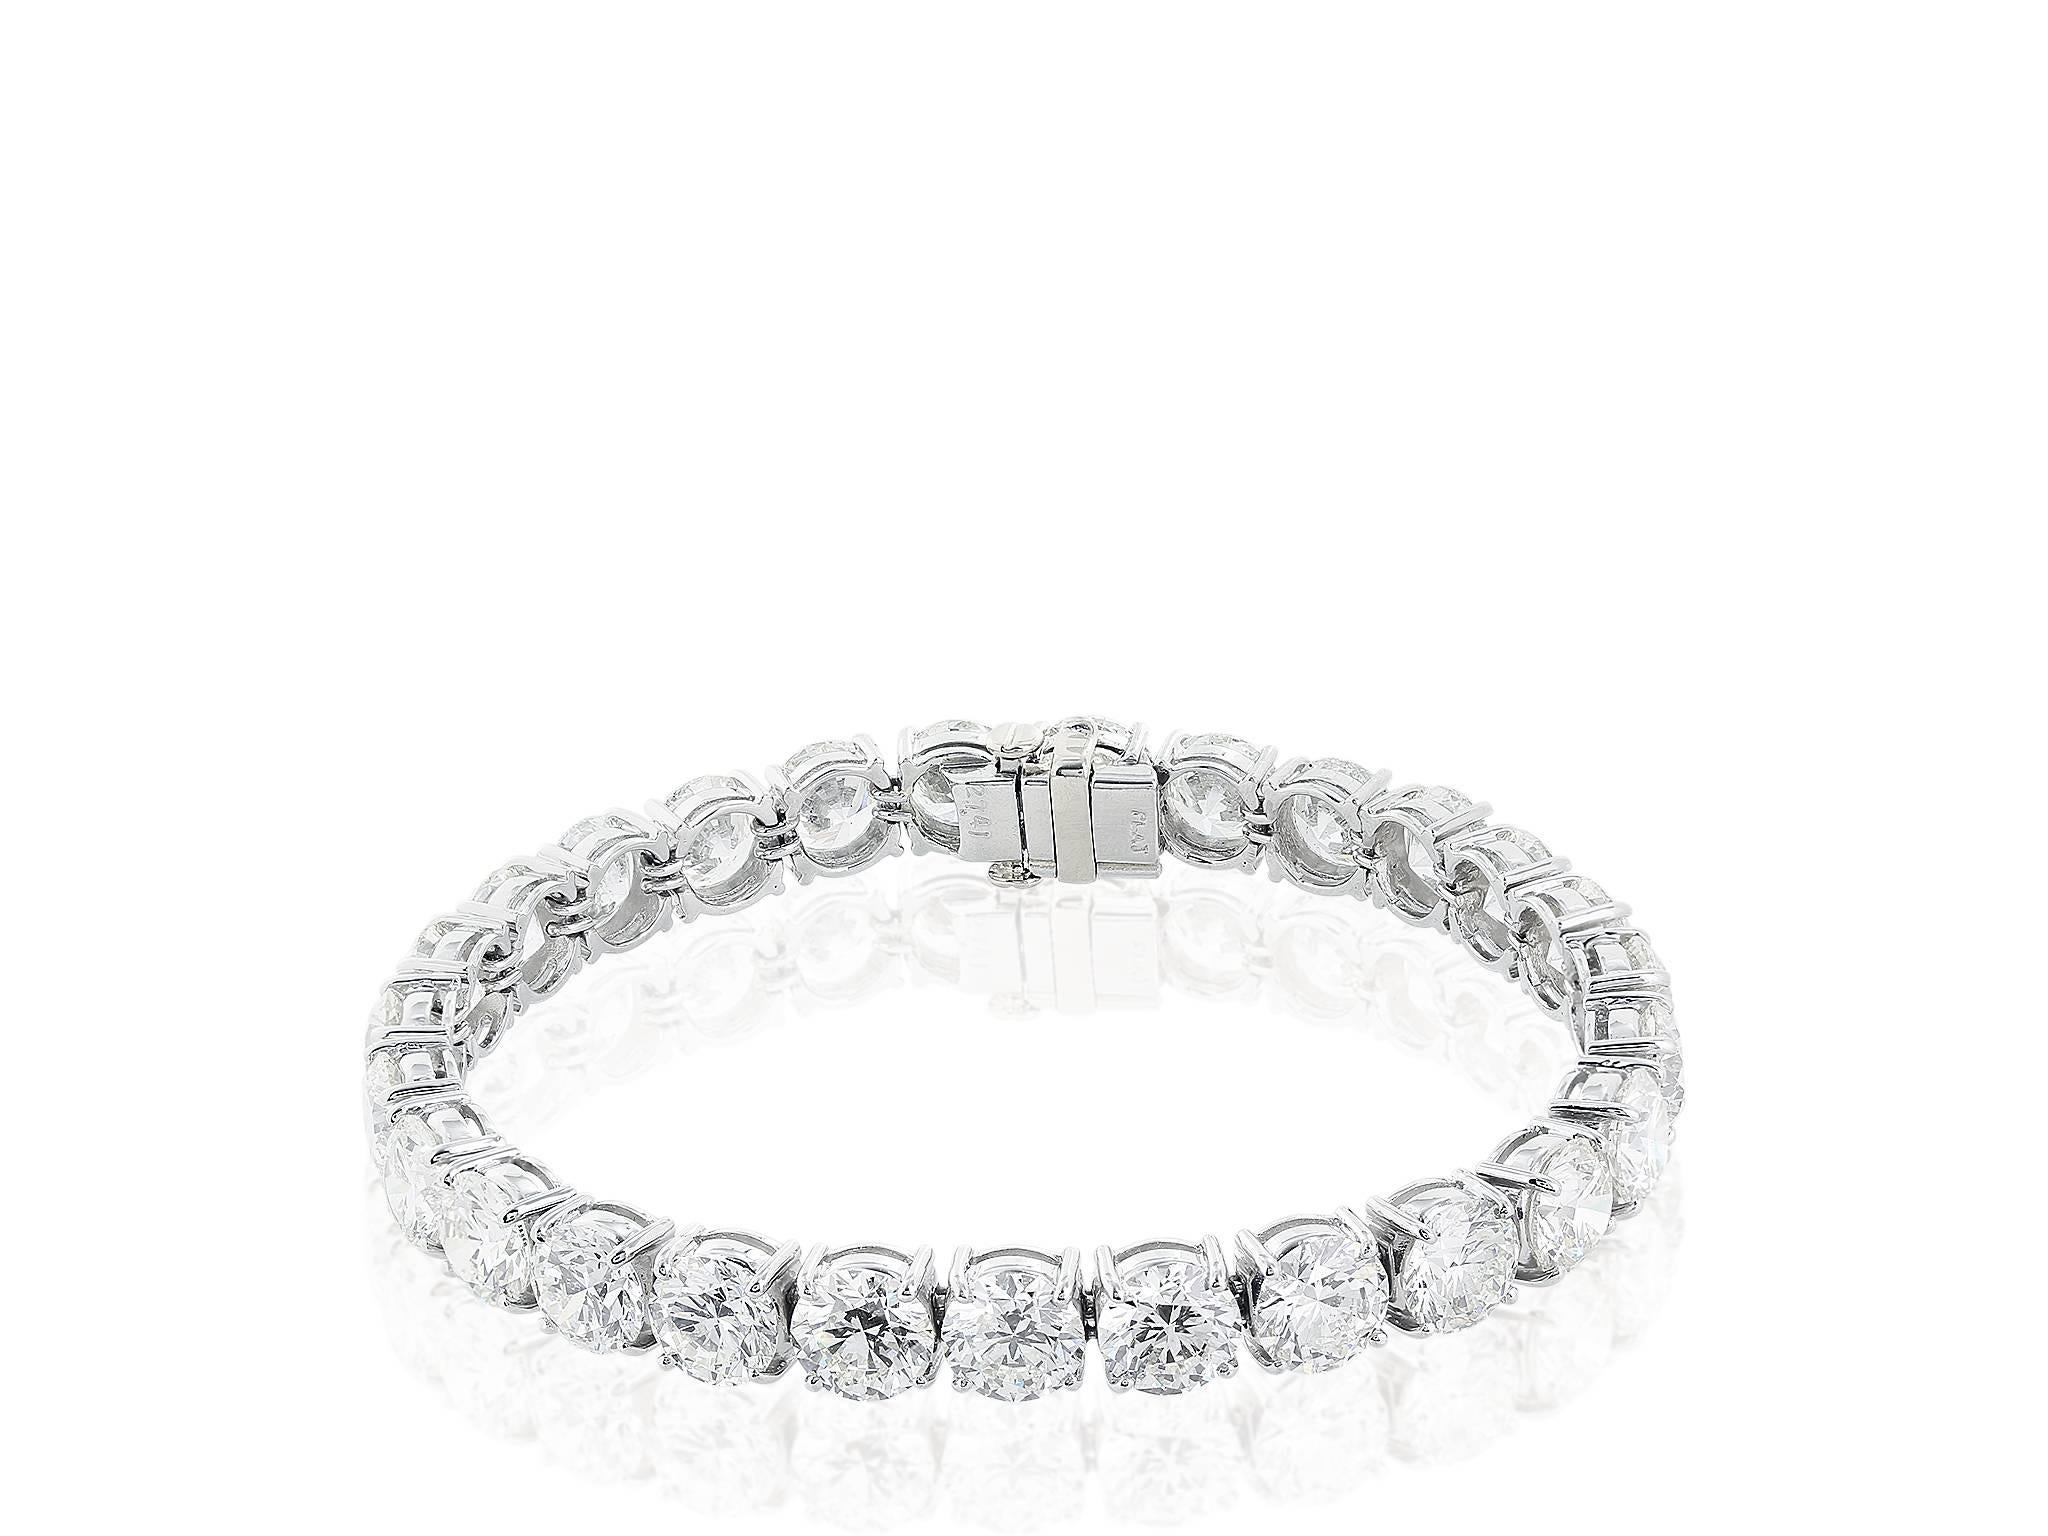 14 karat white gold round brilliant cut diamond flexible tennis bracelet. Consisting of 40 round brilliant ideal cut diamonds having a total approximate weight of 9.52 carats with a color and clarity grade of approximately G-H/VS2.